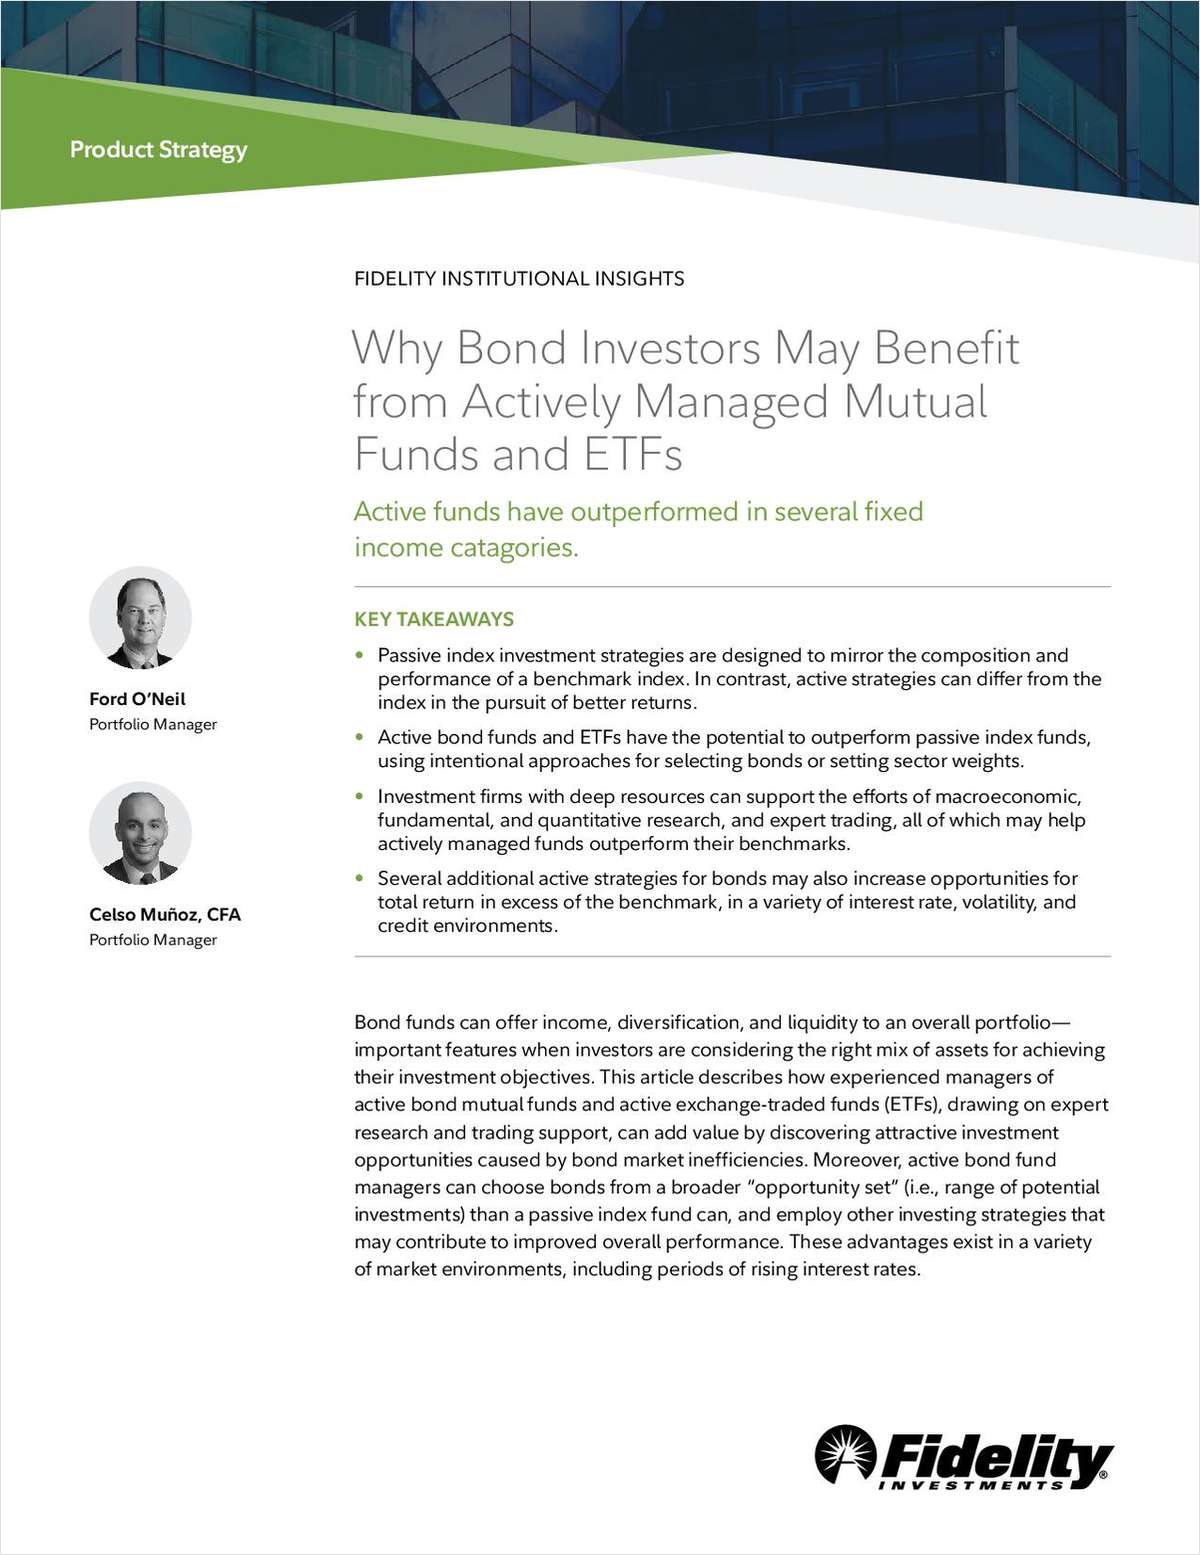 Why Bond Investors May Benefit from Actively Managed Mutual Funds and ETFs